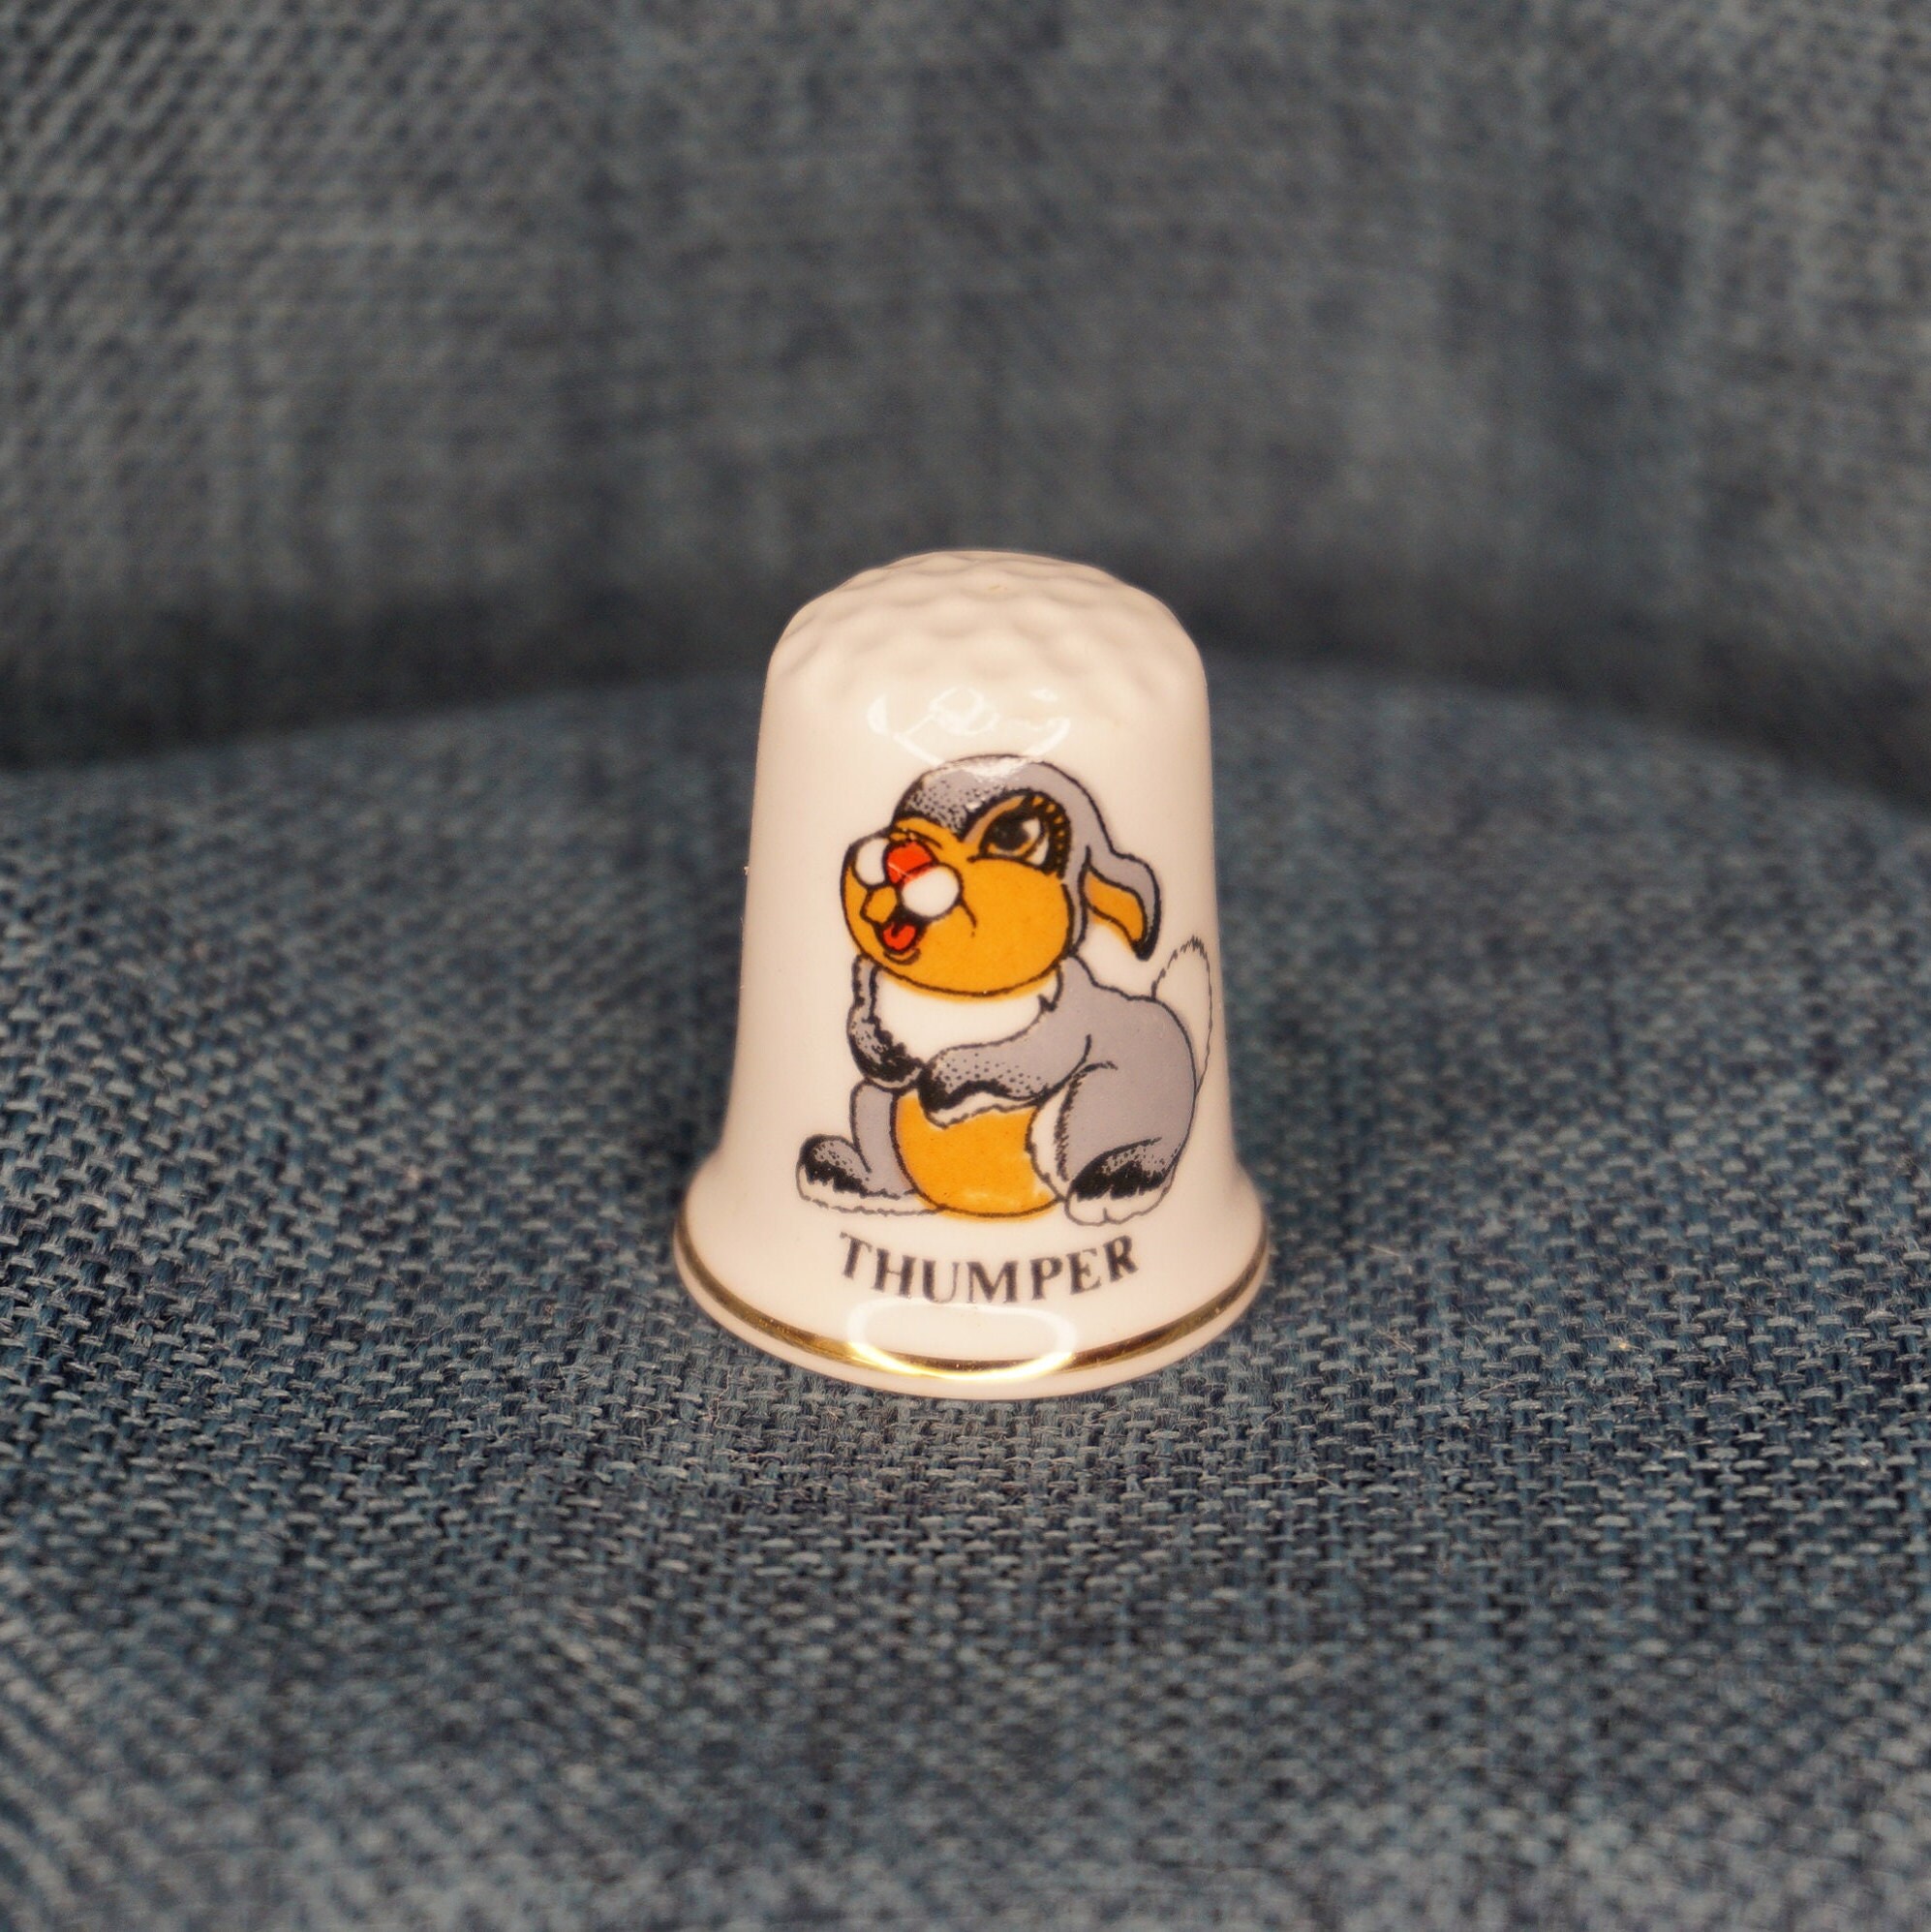 Free Box Sesame Street 50th Anniversary Commemorative Birchcroft Porcelain China Collectable Thimble 